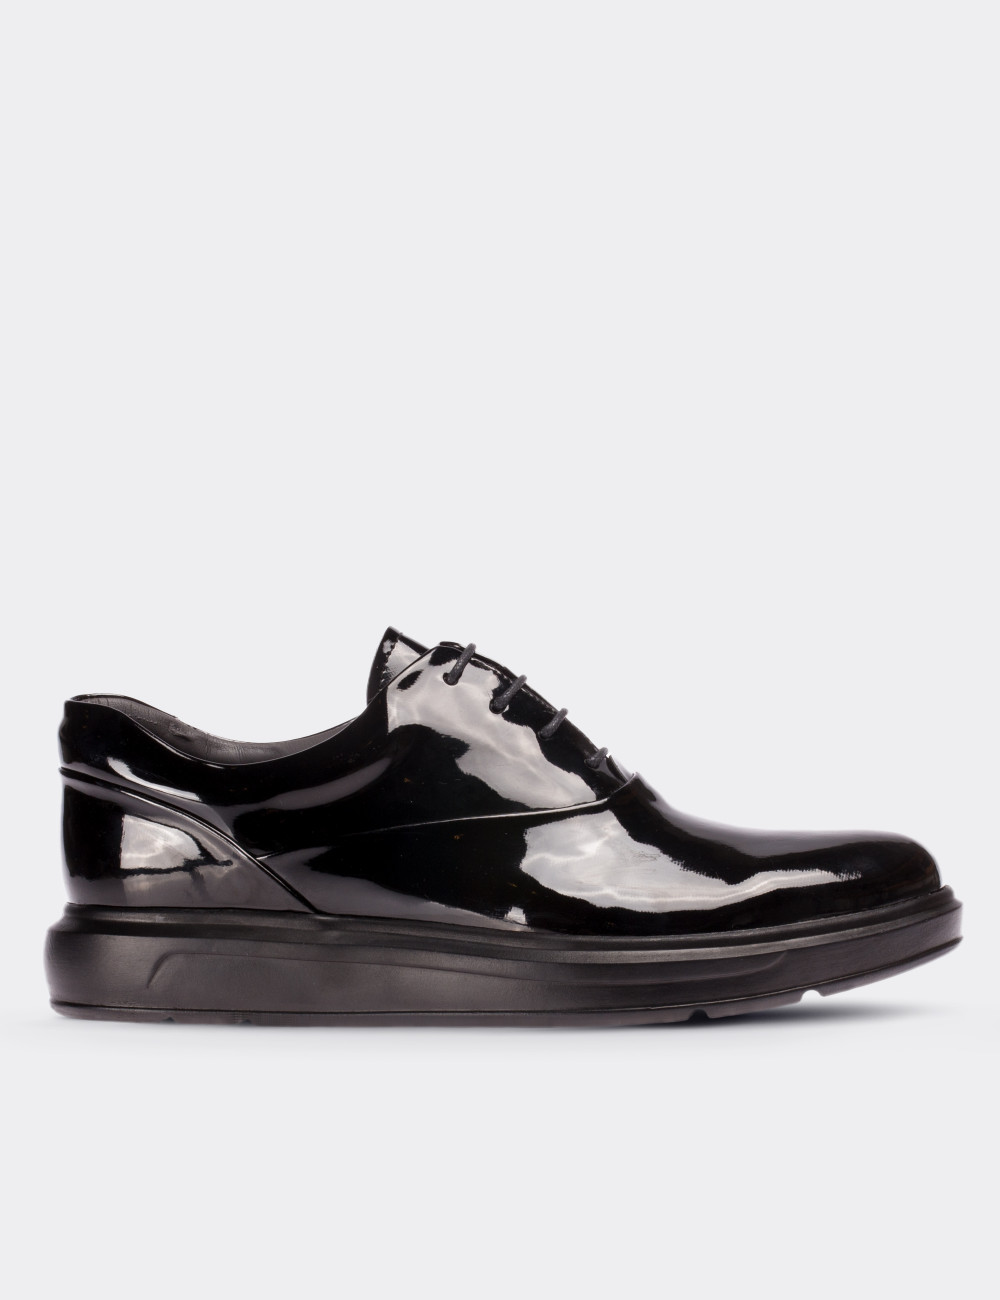 Black Patent Leather Comfort Lace-up 